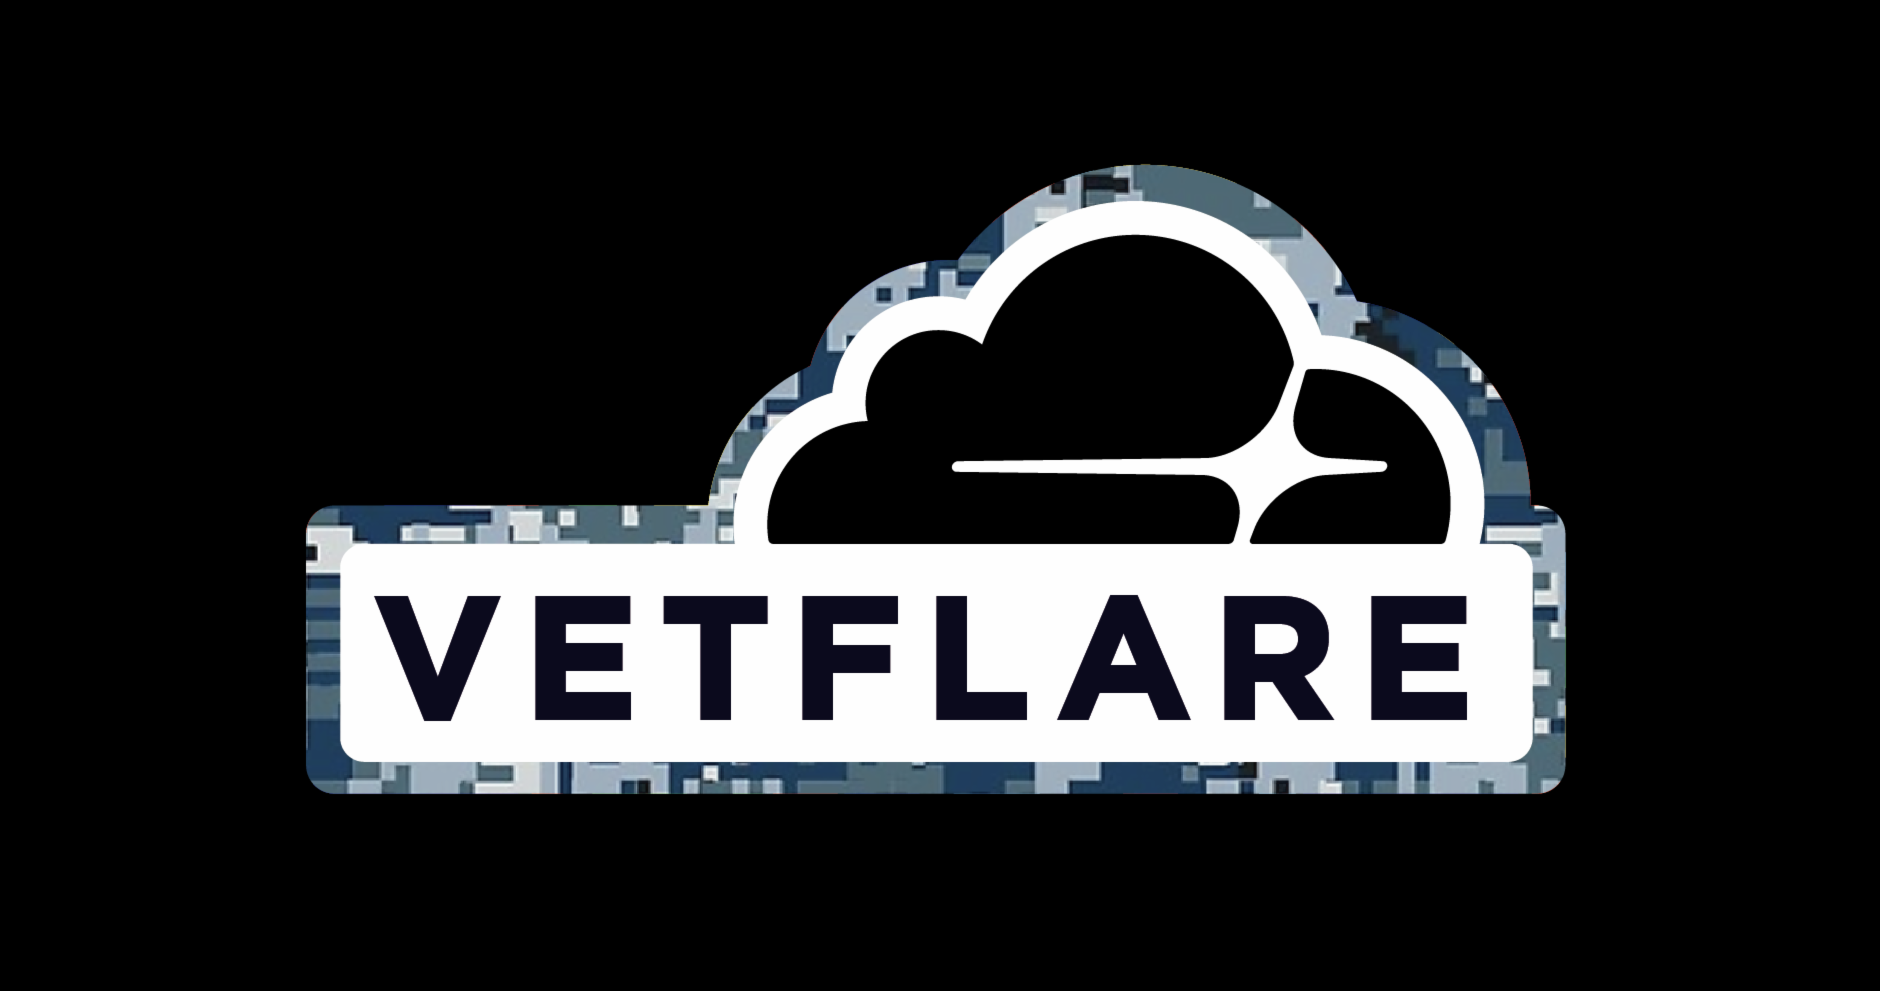 Vetflare, Cloudflare's Military Veteran Employee Group Launches